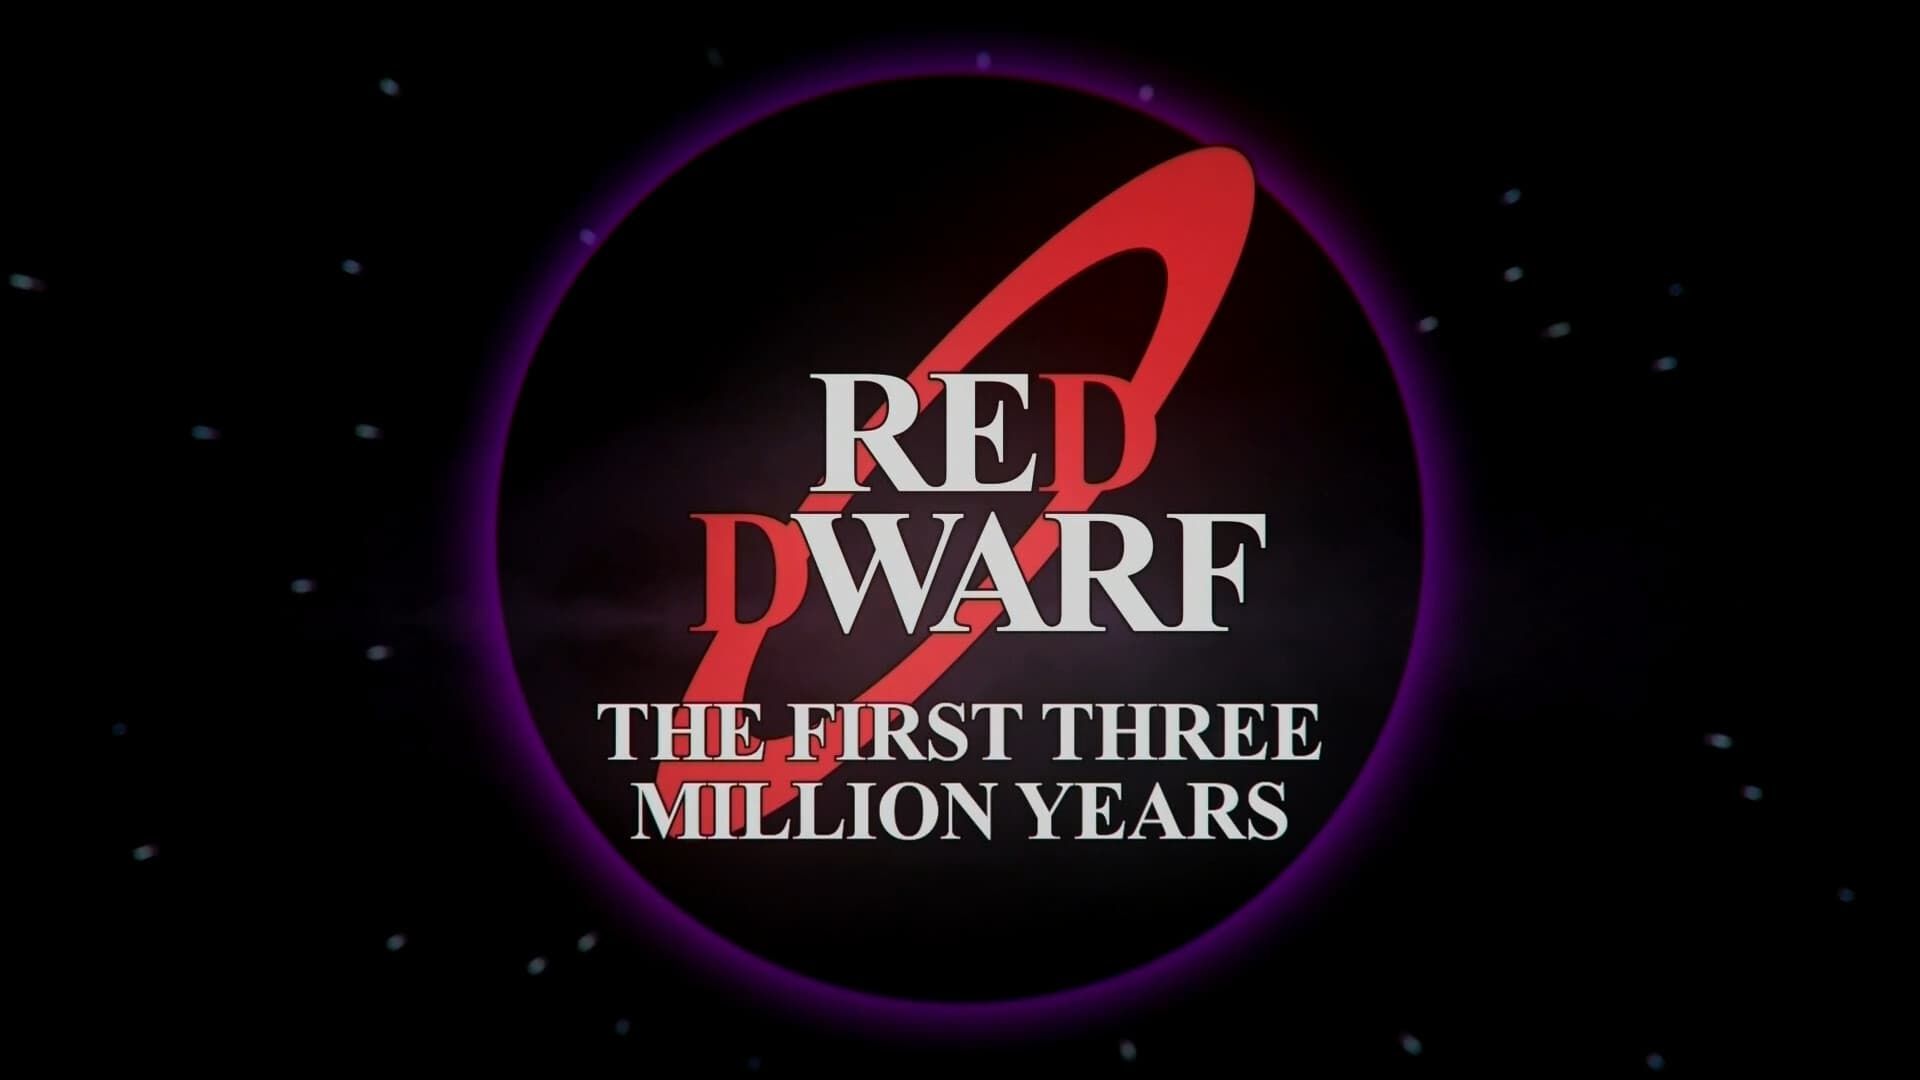 Red Dwarf: The First Three Million Years Backdrop